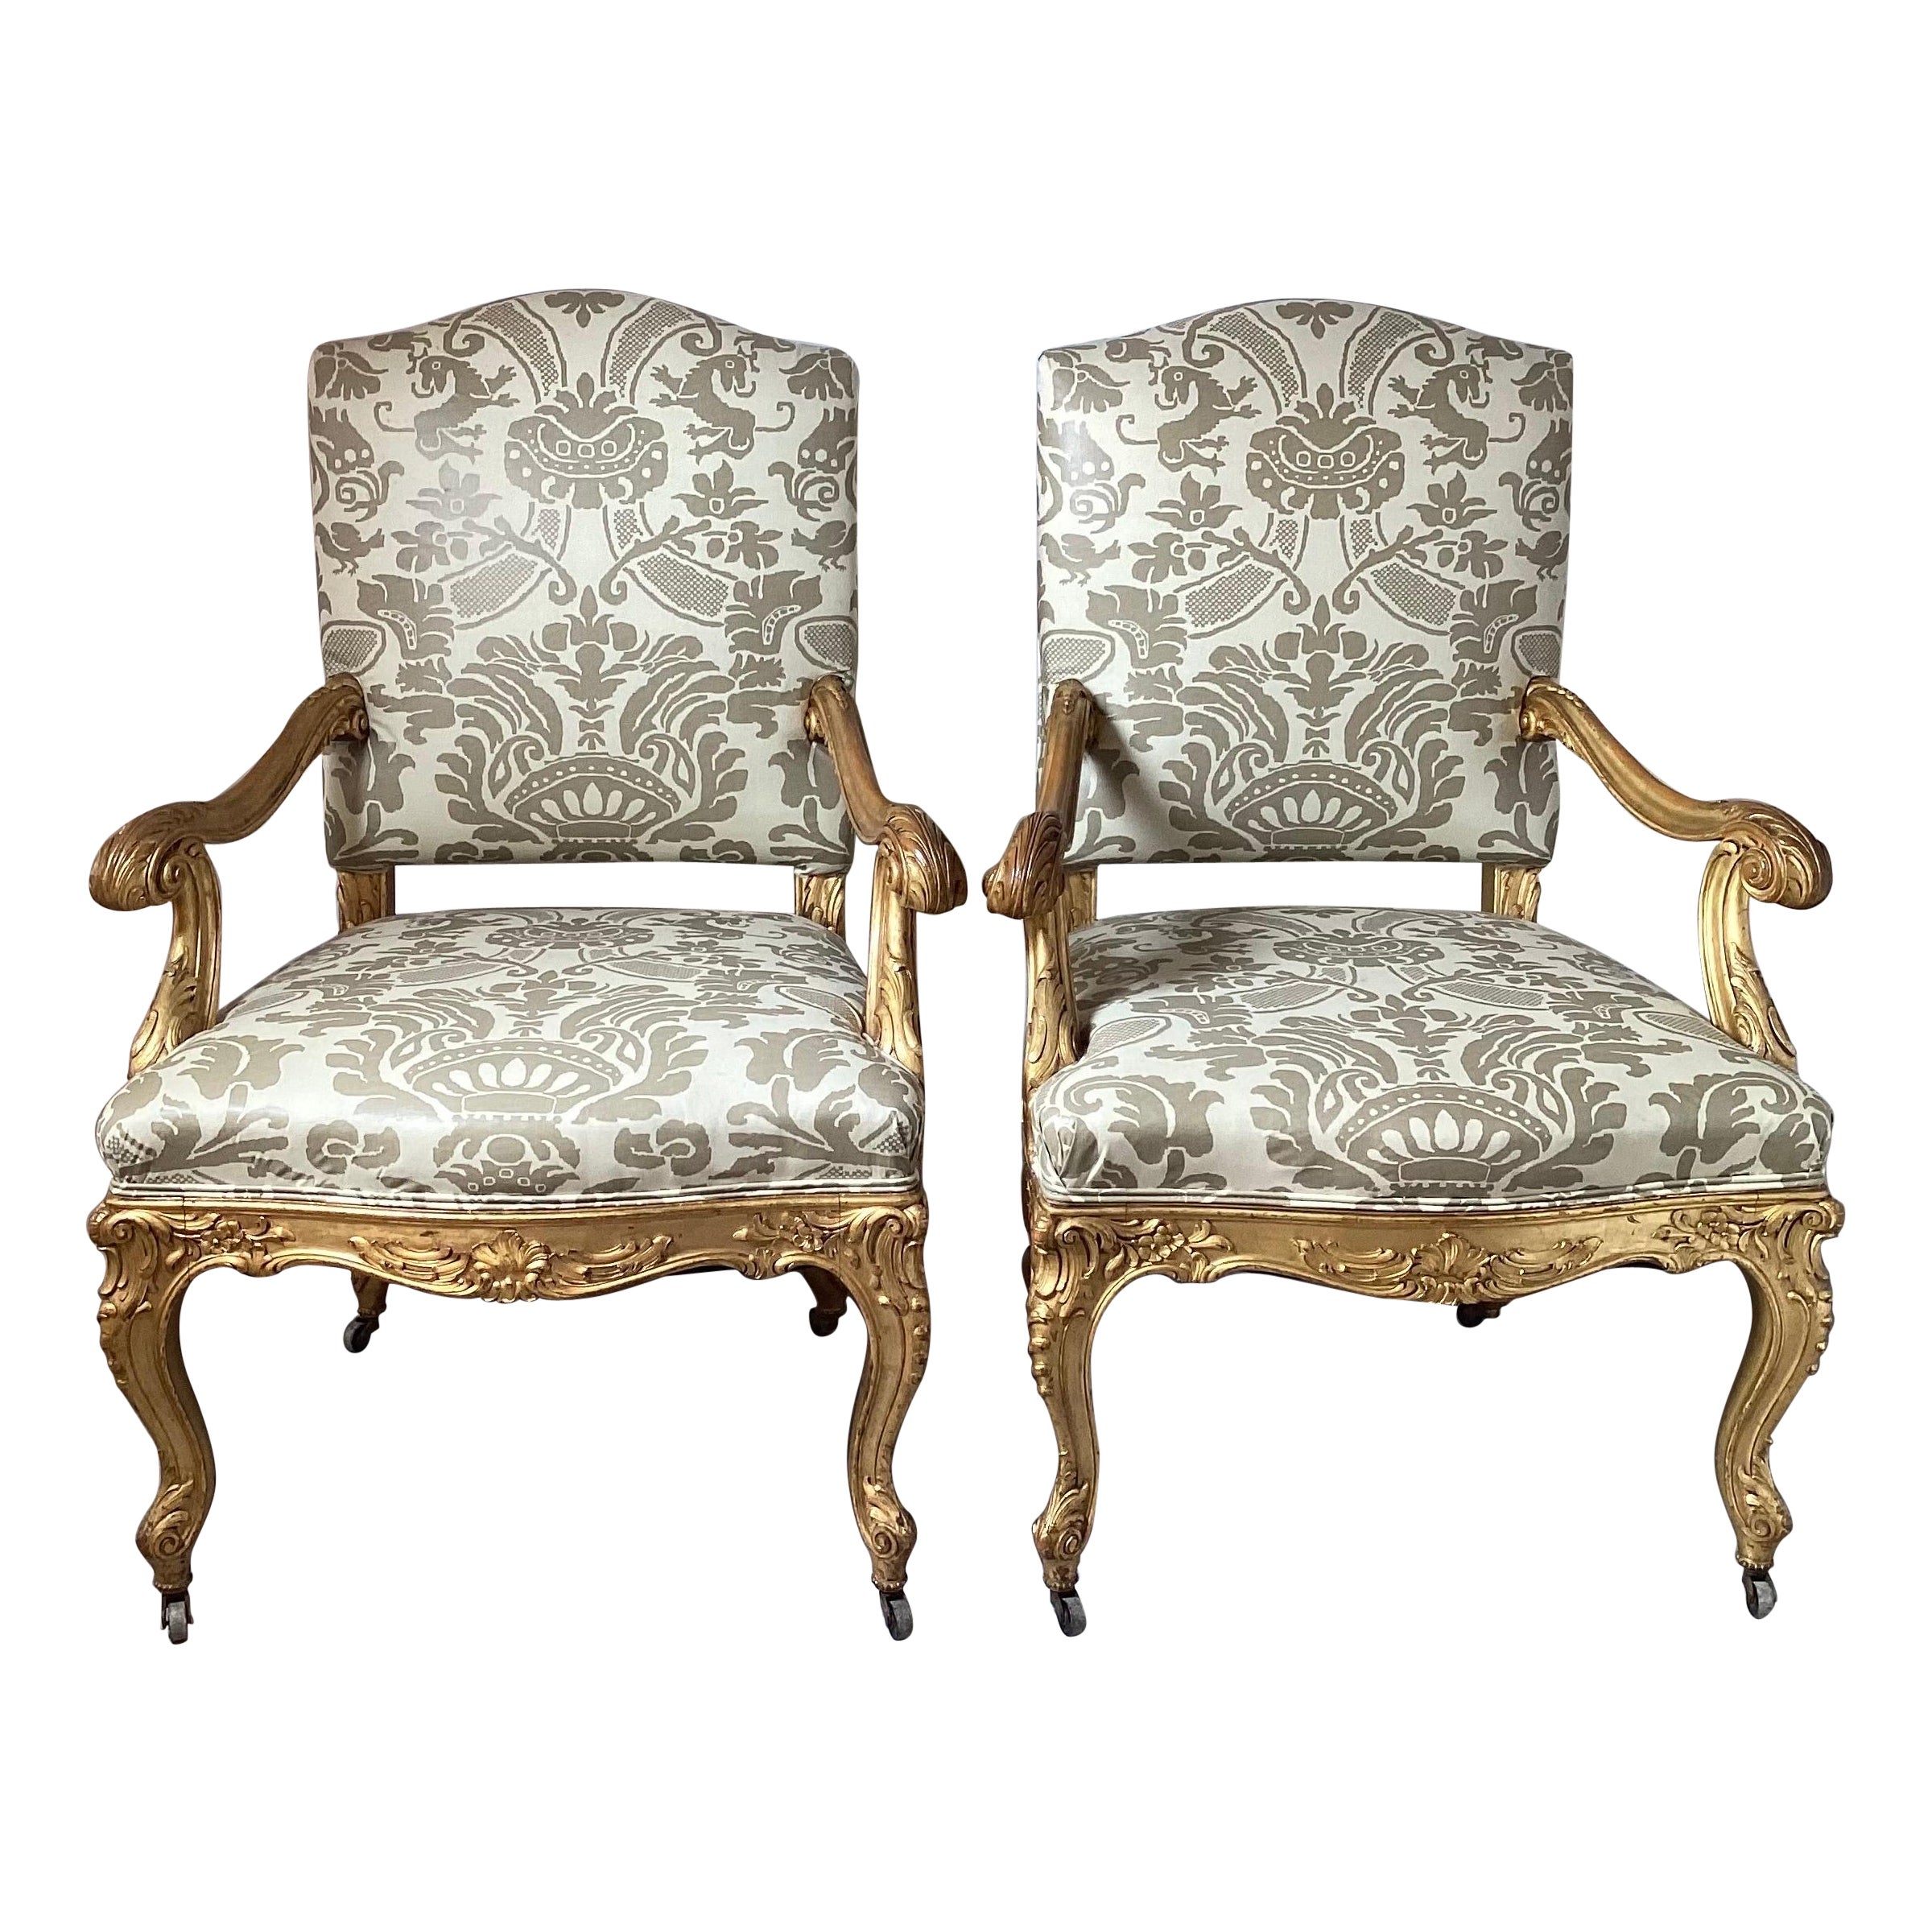 Pair of 19th Century Giltwood Fauteuils Upholstered Chairs For Sale